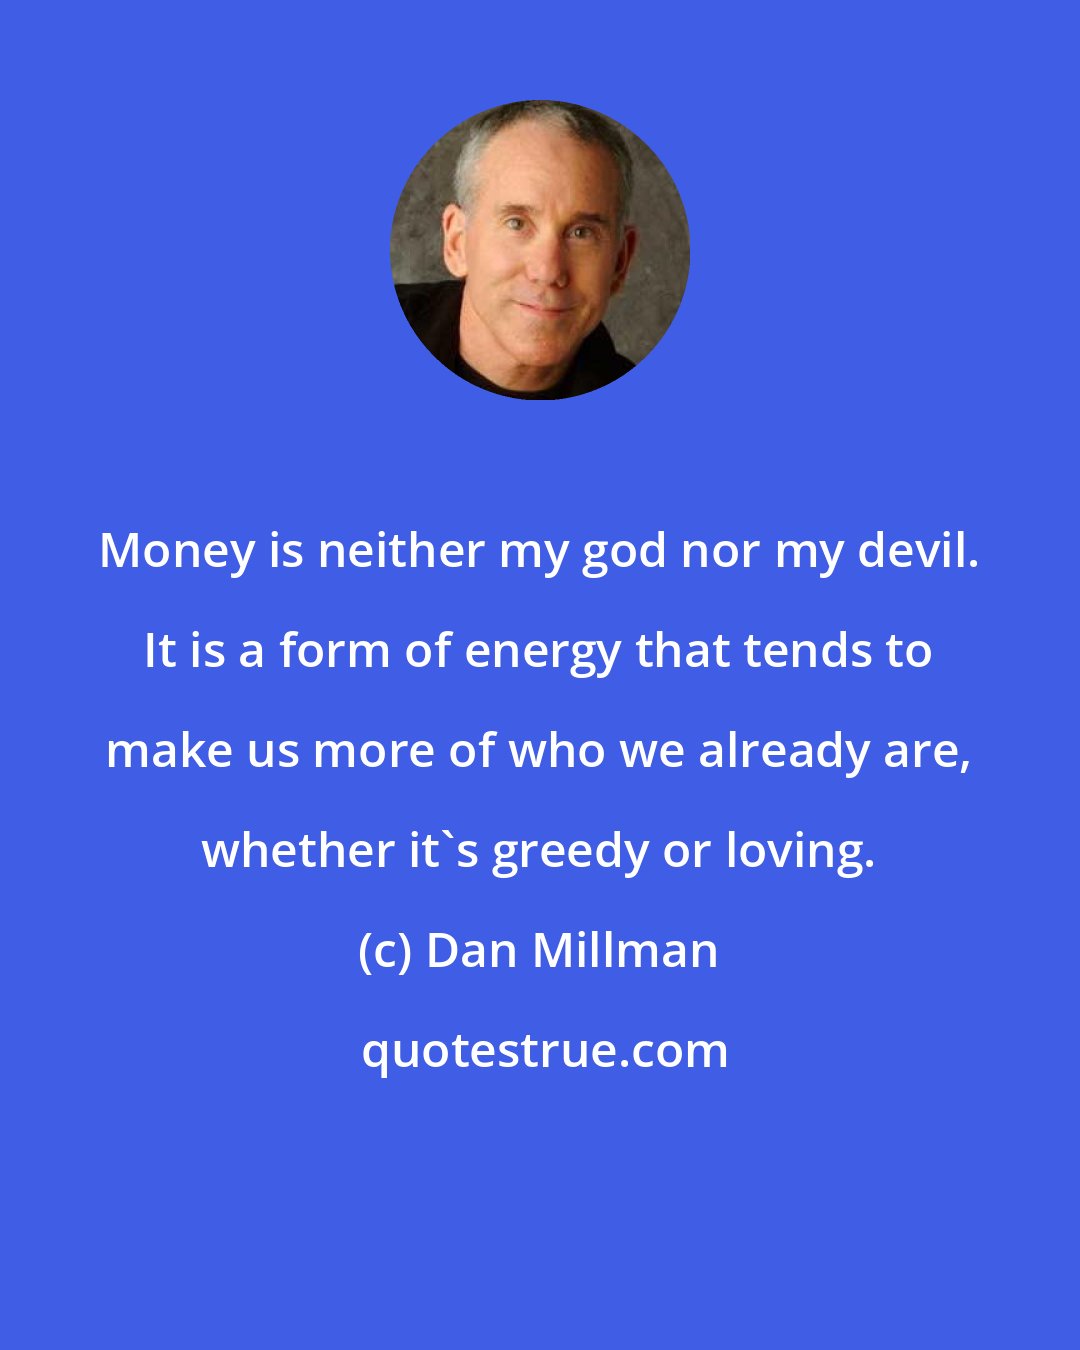 Dan Millman: Money is neither my god nor my devil. It is a form of energy that tends to make us more of who we already are, whether it's greedy or loving.